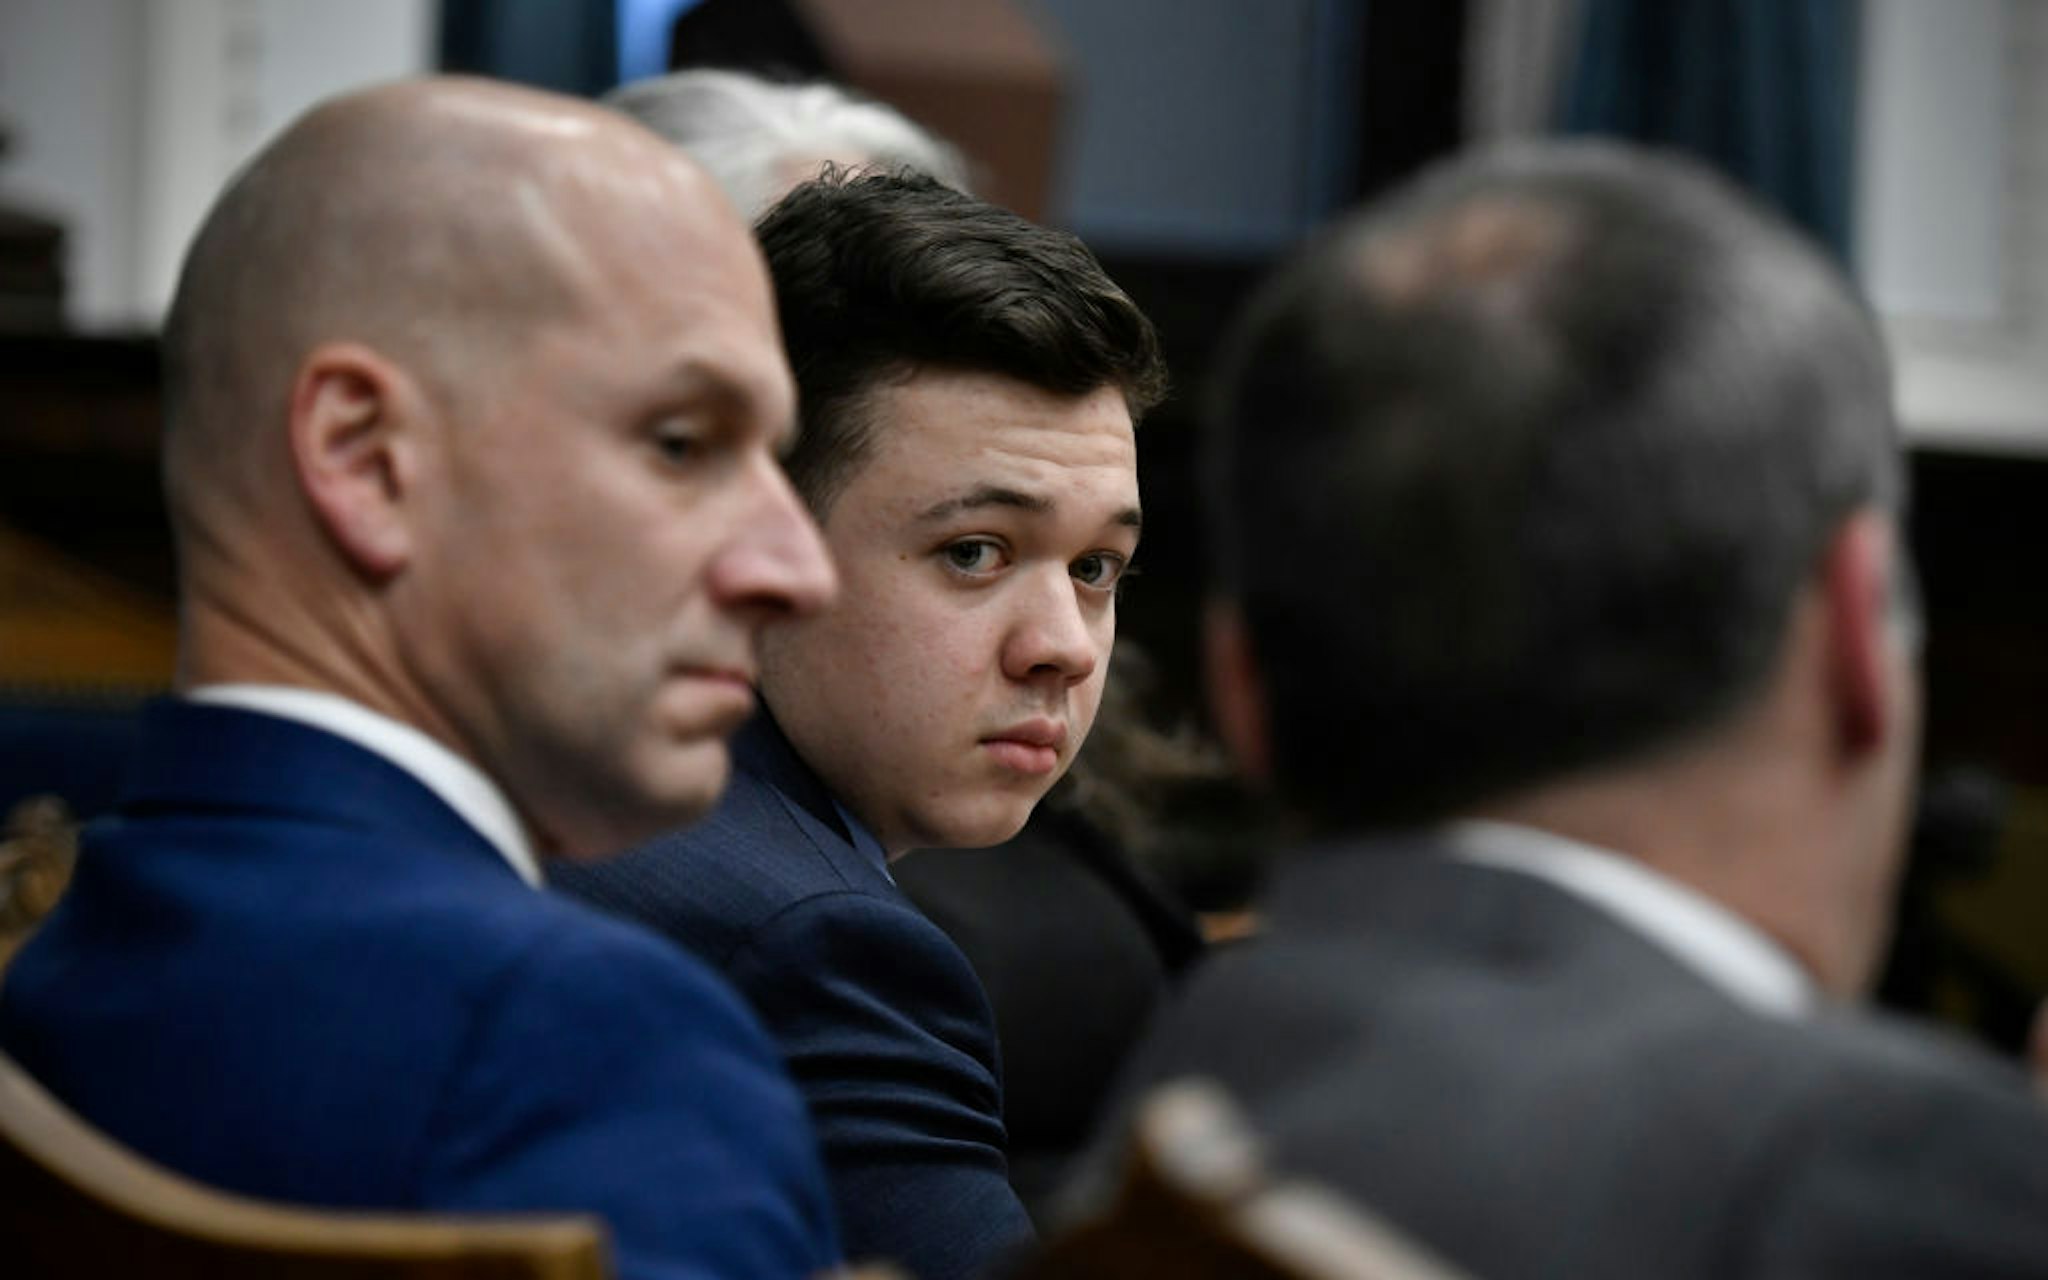 Kyle Rittenhouse, center, looks over to his attorneys as the jury is dismissed for the day during his trial at the Kenosha County Courthouse on November 18, 2021 in Kenosha, Wisconsin.